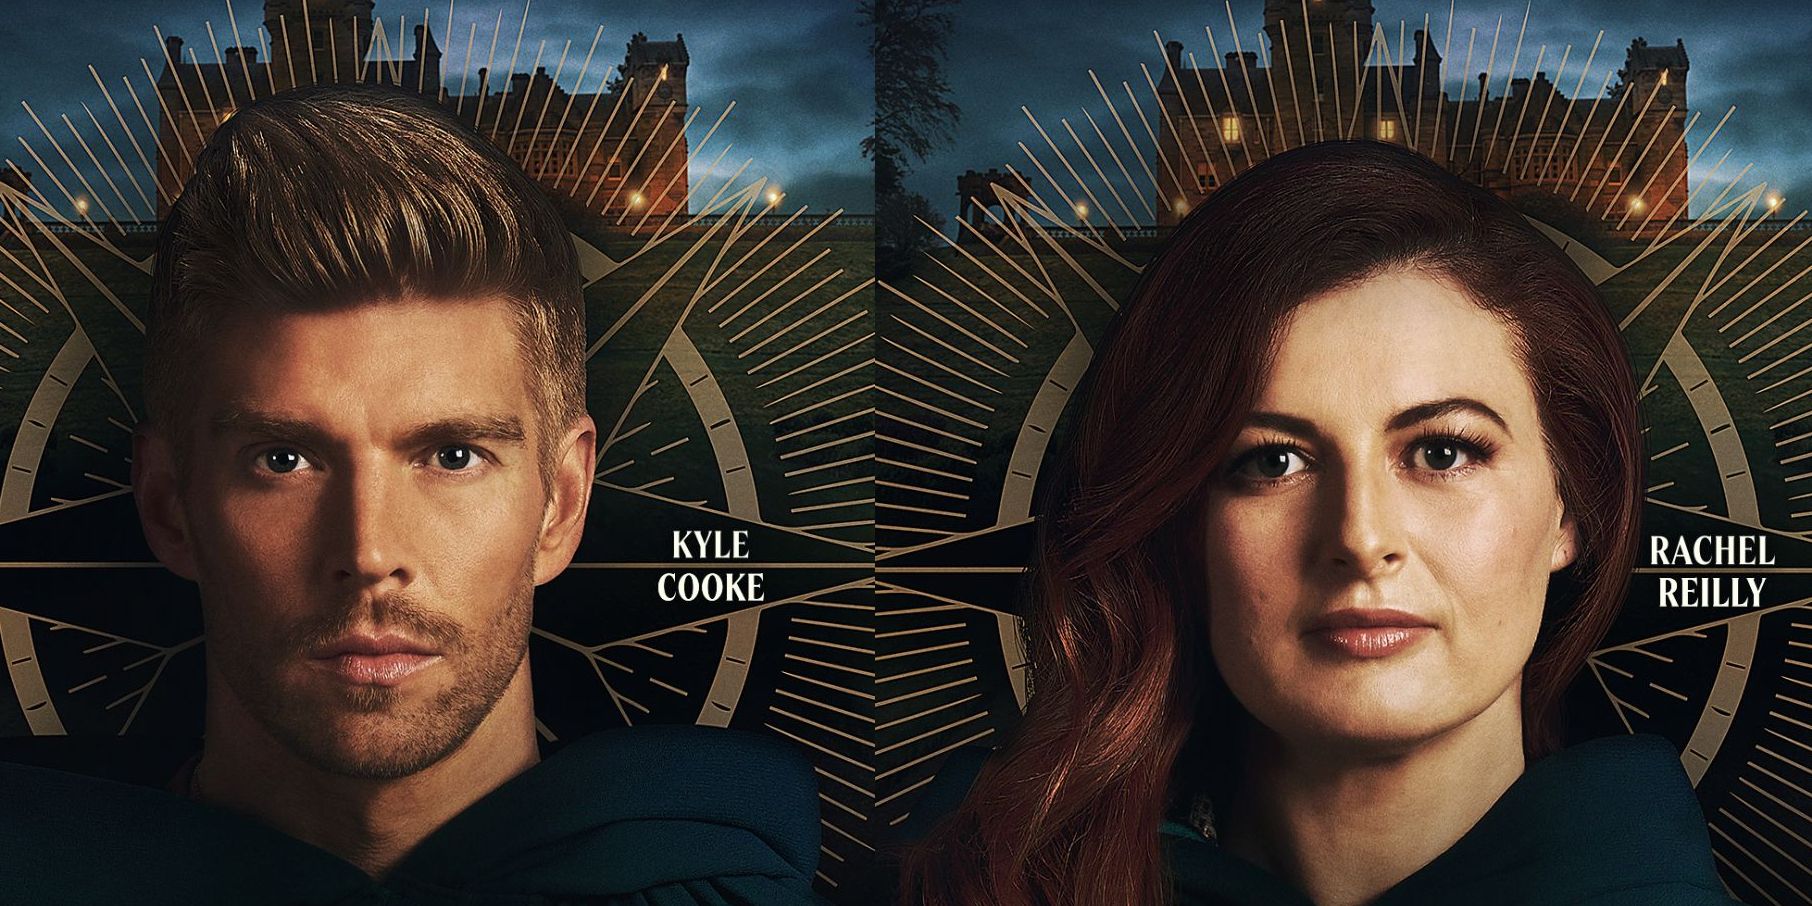 Split image of Kyle Cooke and Rachel Reilly